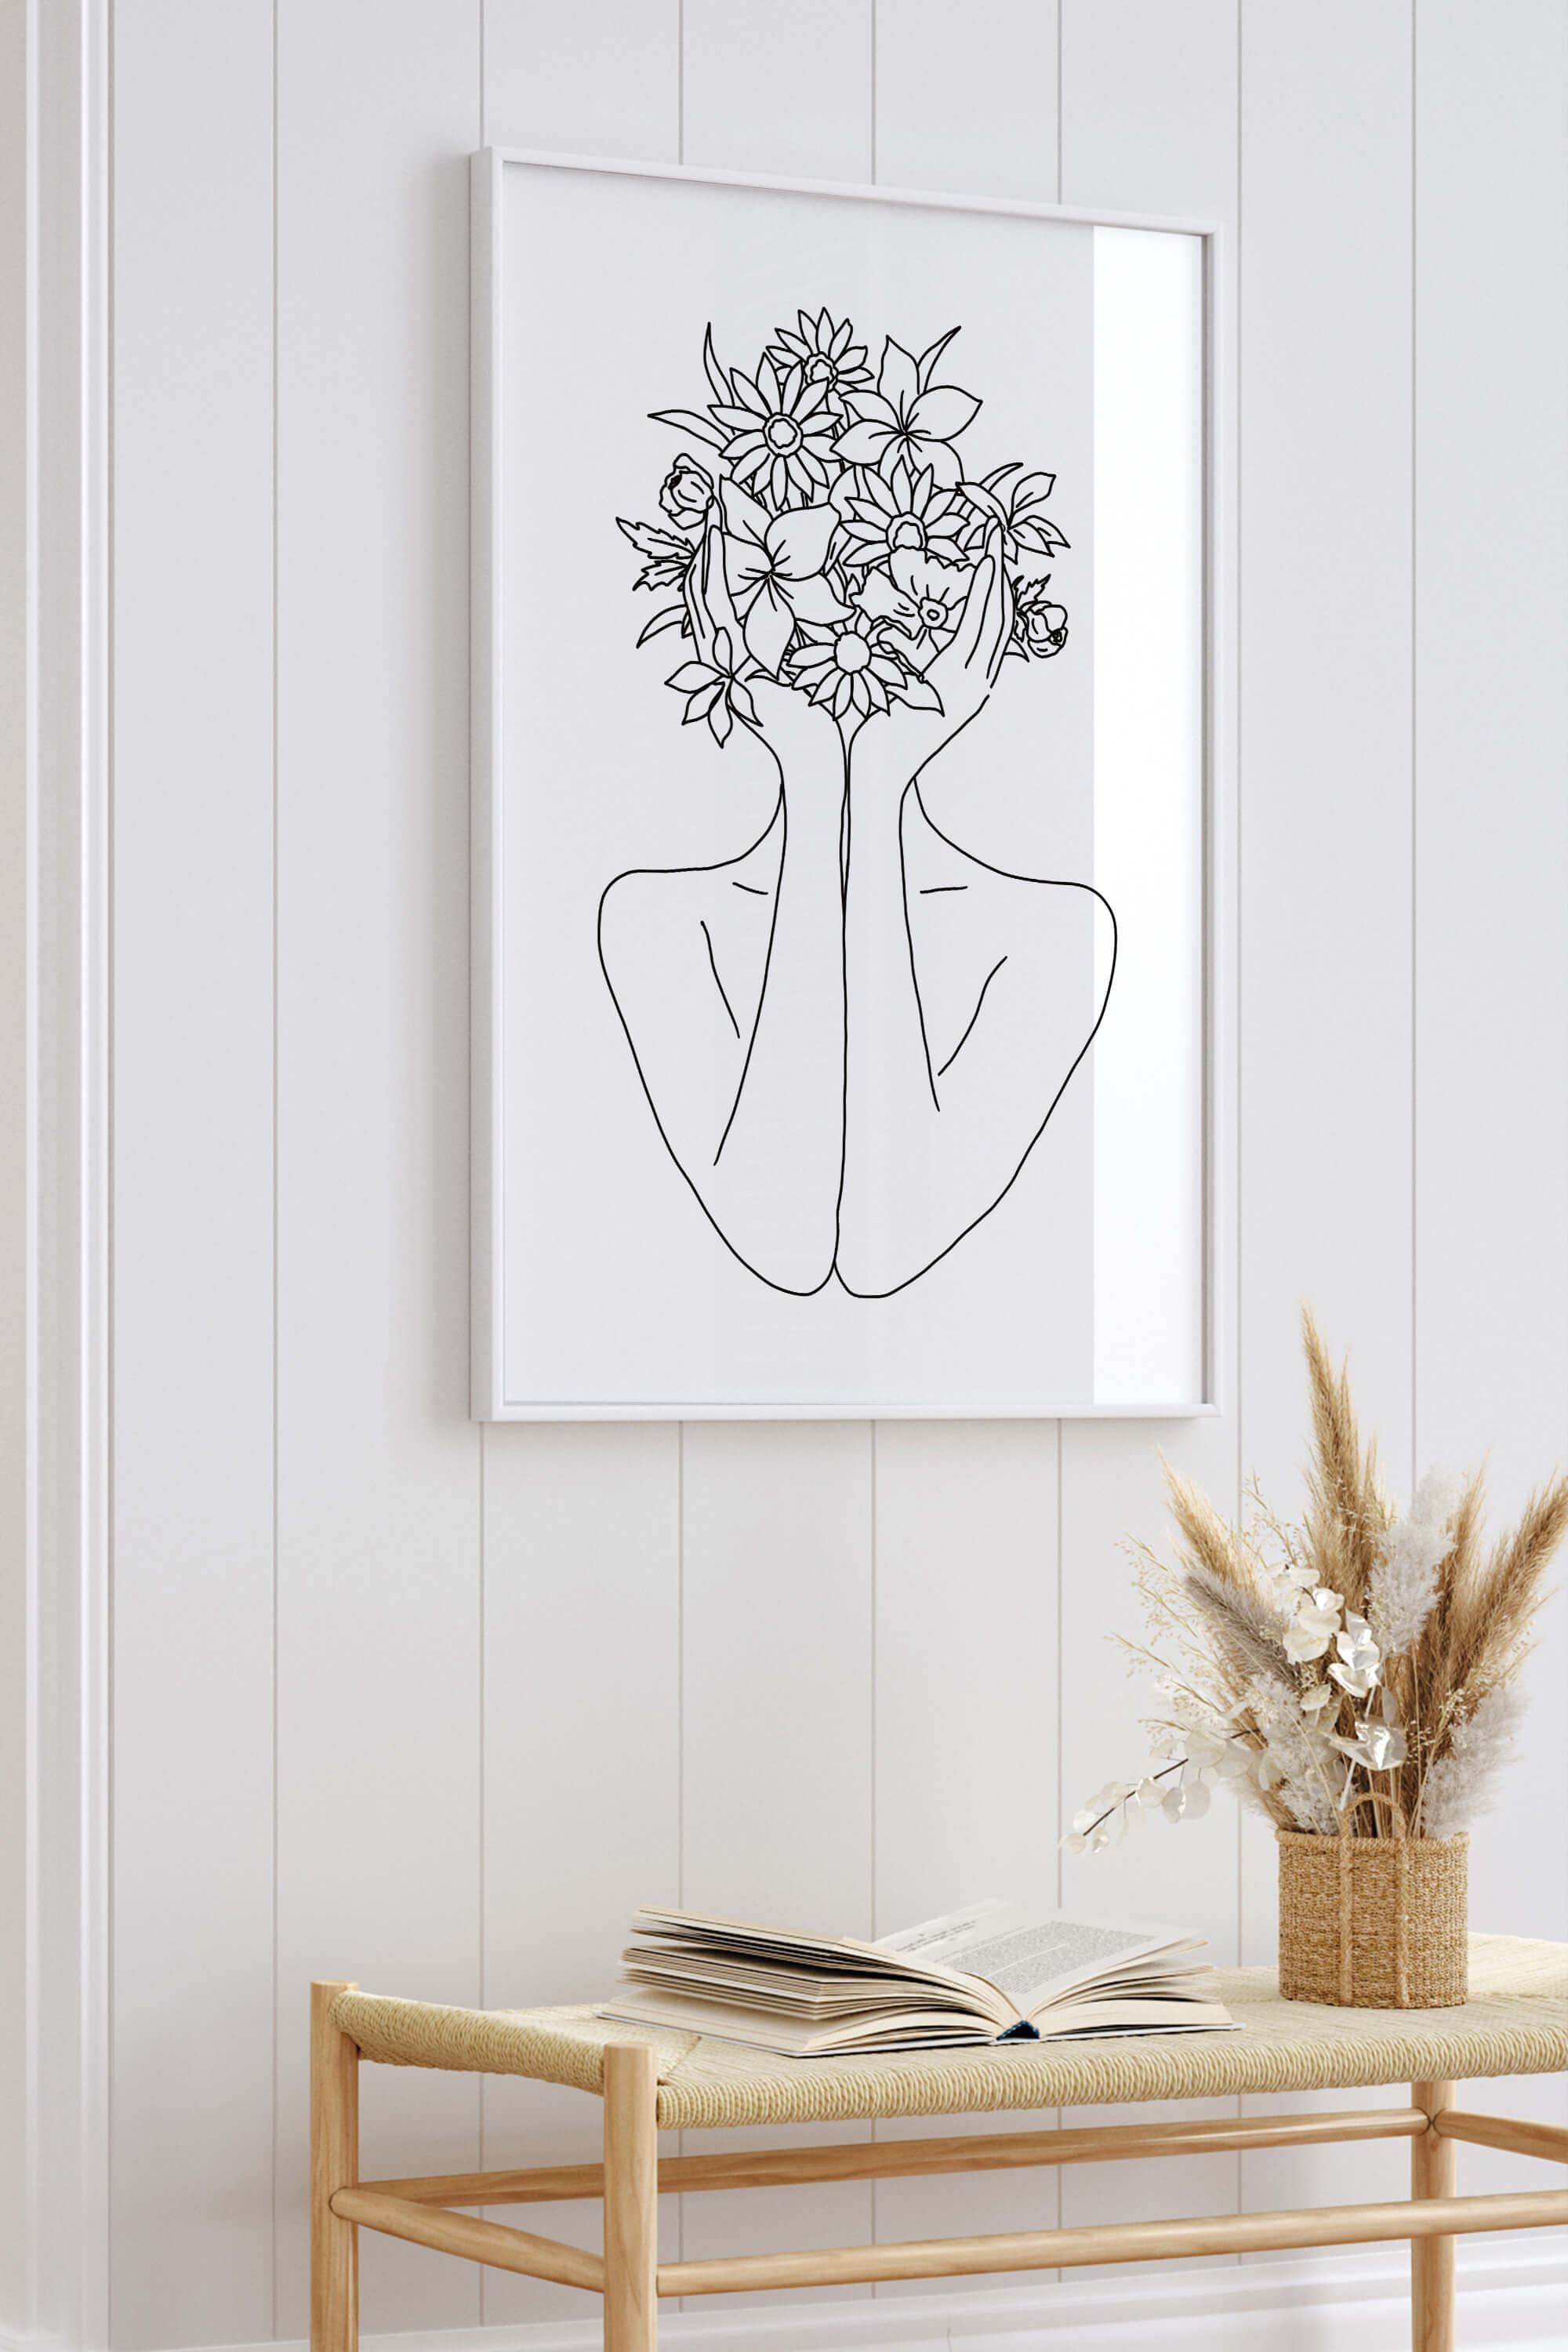 Fine art black and white line art print capturing the essence of abstract beauty. The image, with its floral motifs and woman's face, adds a timeless touch to your surroundings. Create a unique ambiance with this striking monochrome wall art.